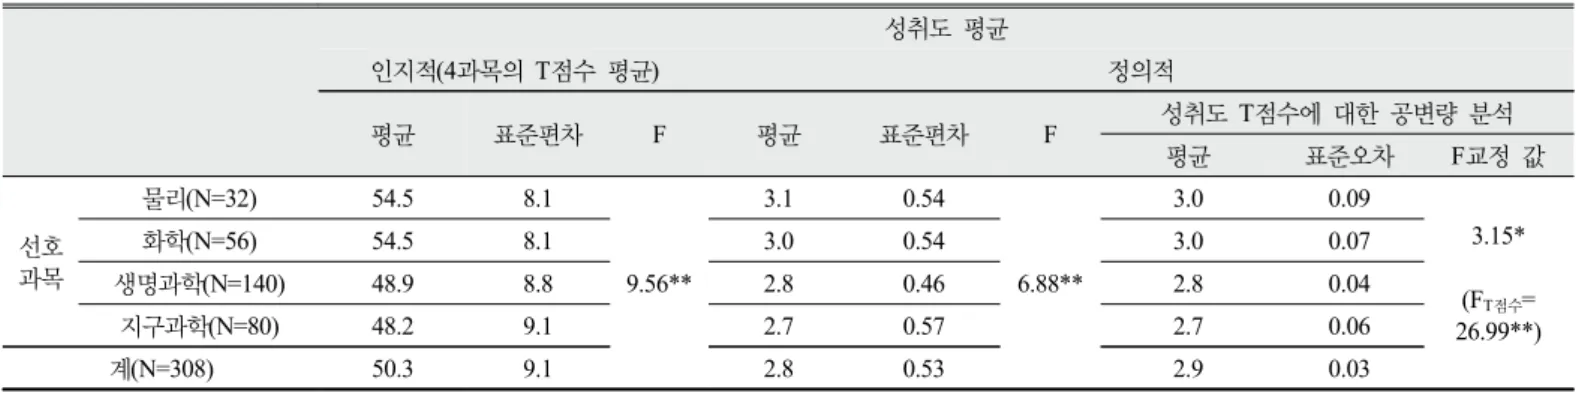 Table 11.  Cognitive and affective achievement according to favorite subject